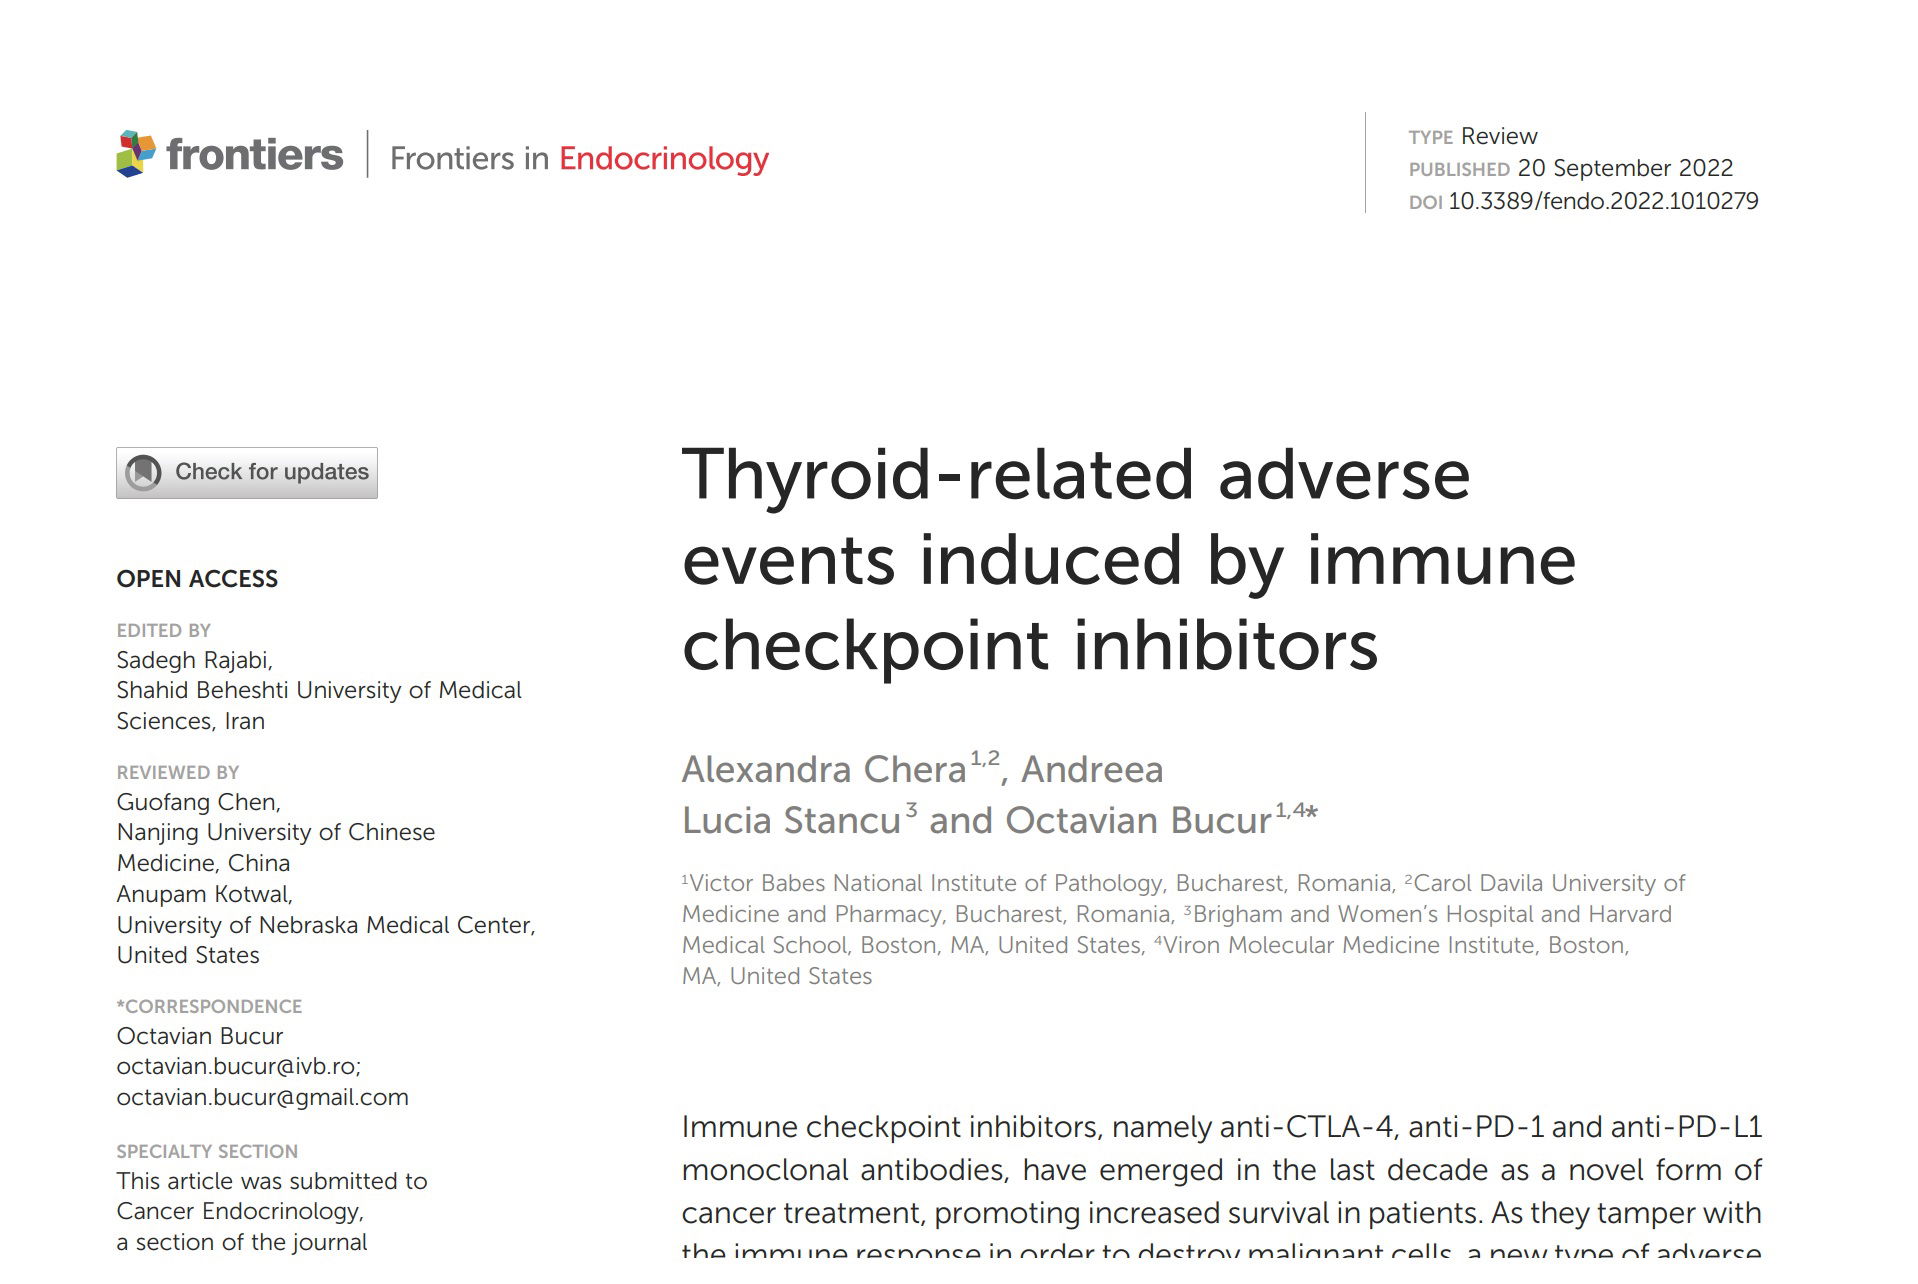 Manuscript by Alexandra Chera is now published in Frontiers in Endocrinology (impact factor 6) - congratulations!